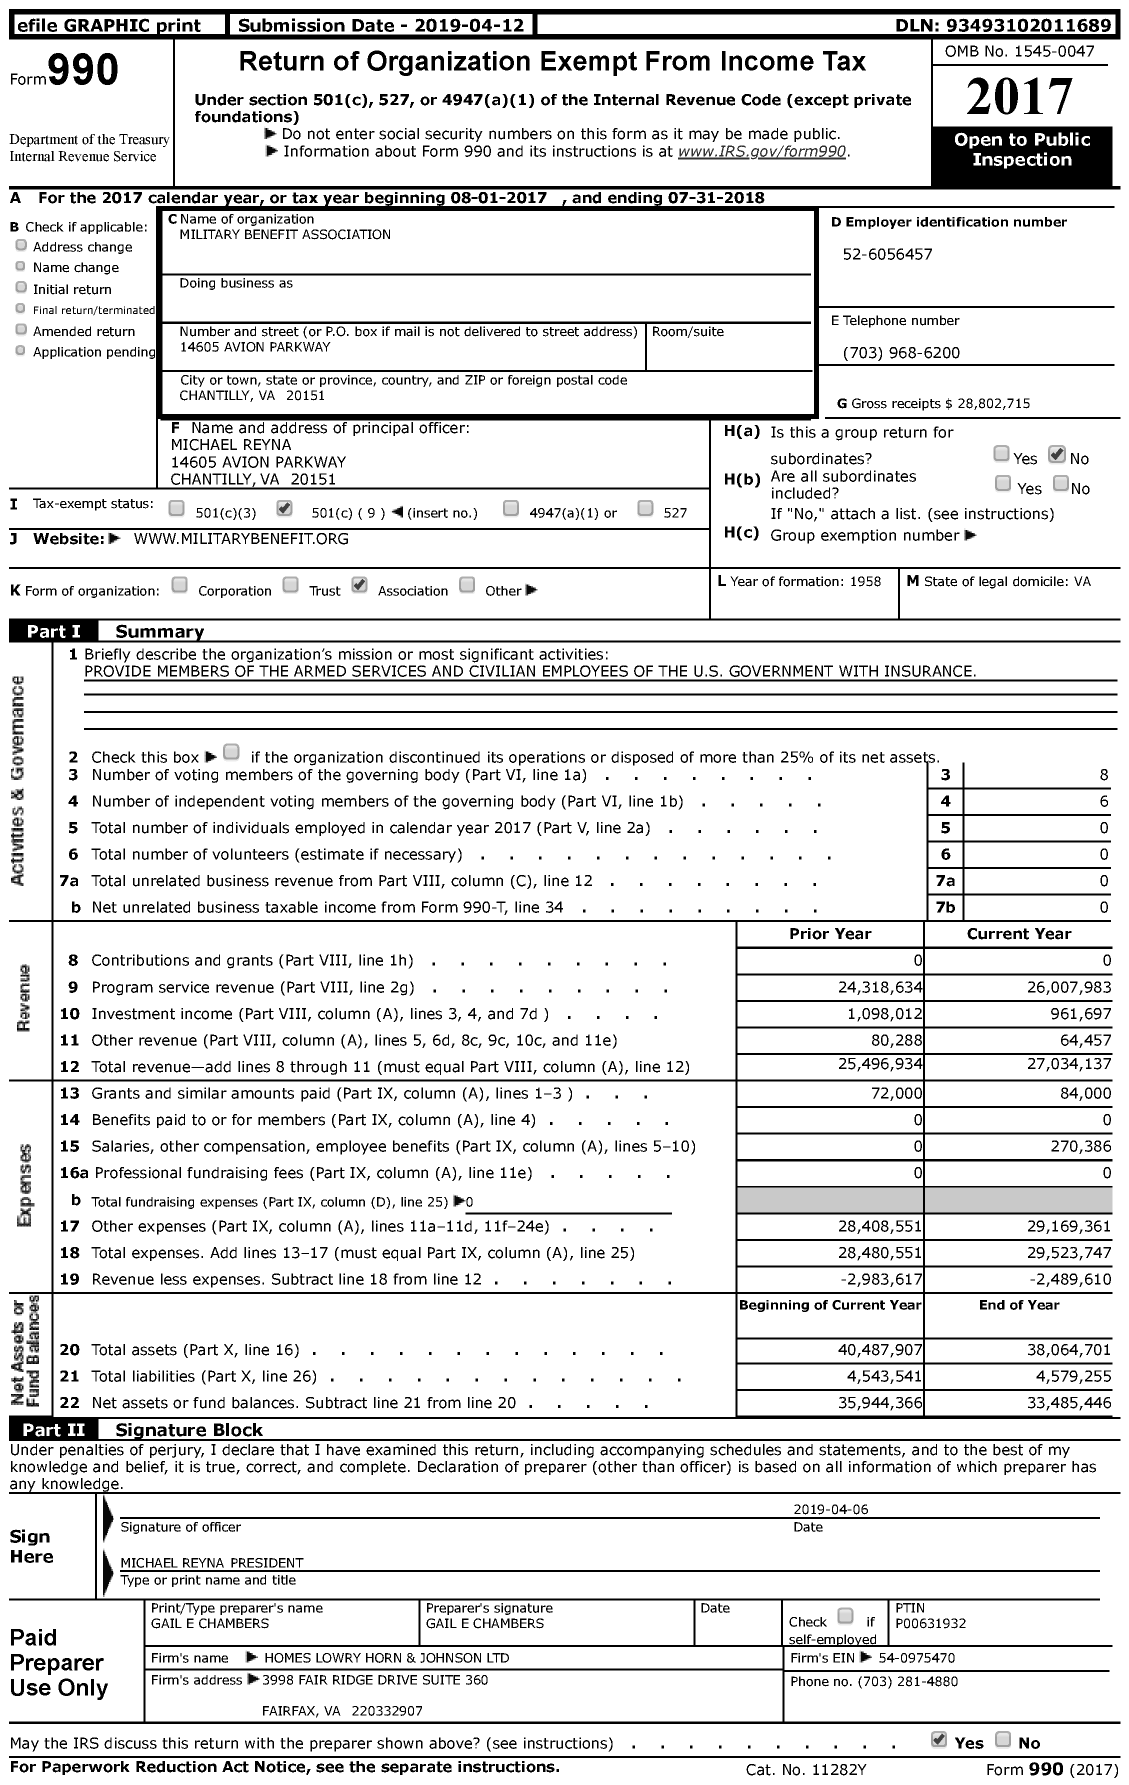 Image of first page of 2017 Form 990 for Military Benefit Association (MBA)